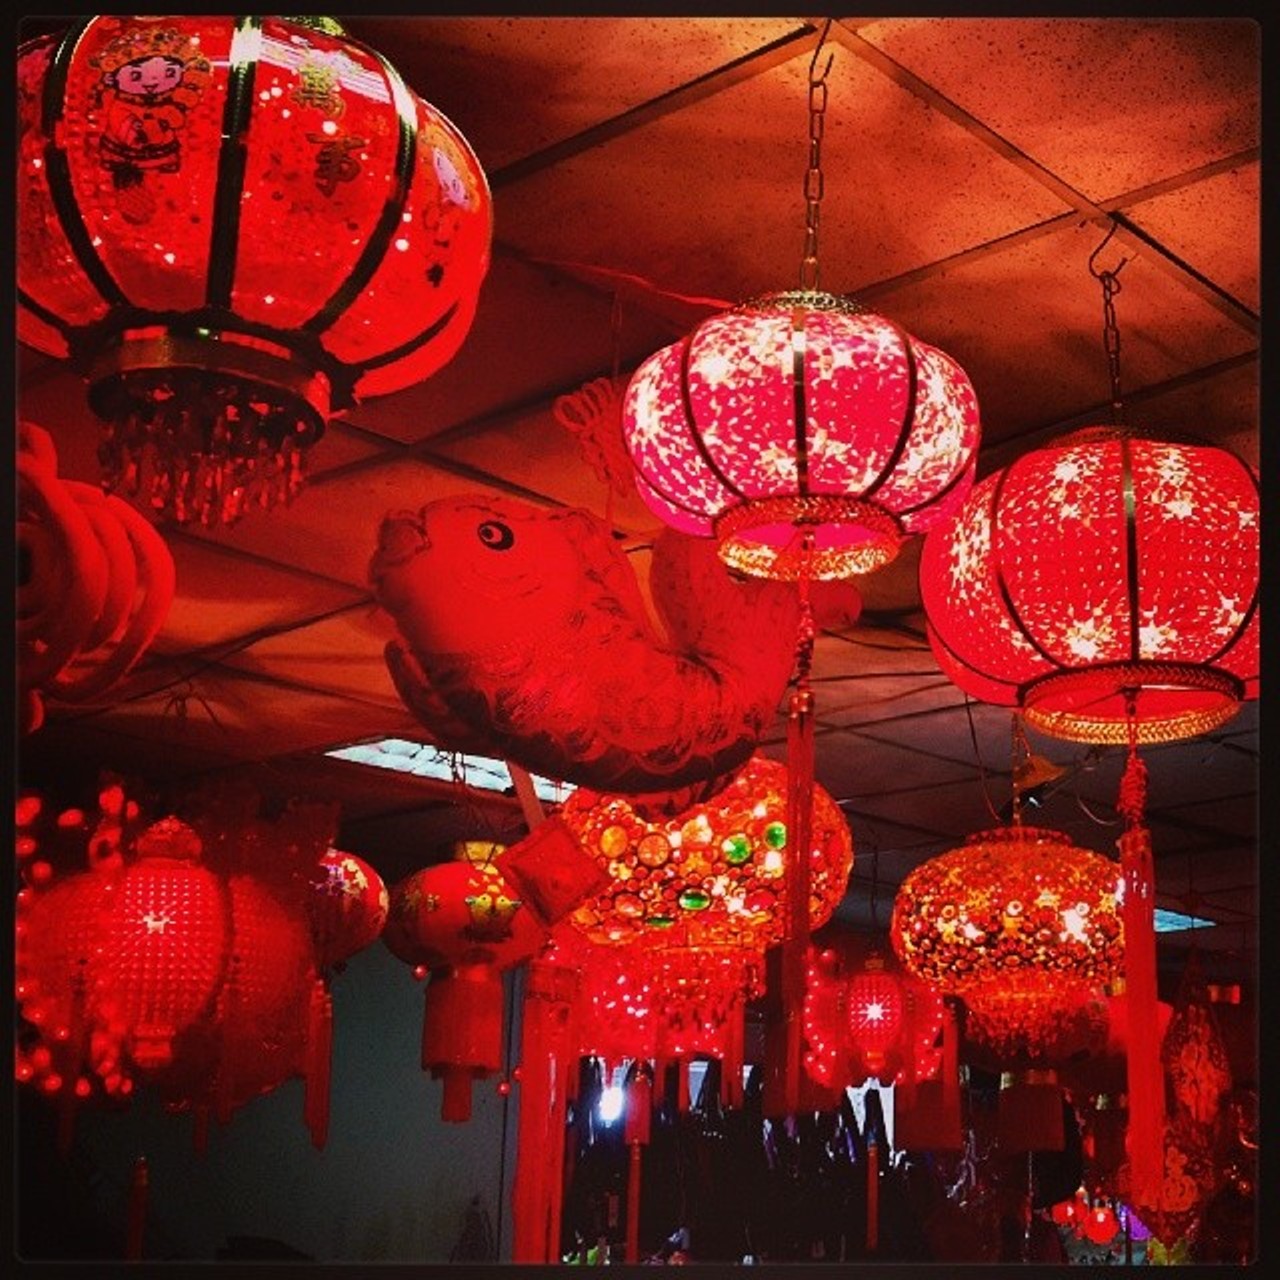 Who says we have to be confined to just American New Year? The College Club of Cleveland typically hosts a Chinese New Year celebration of epic proportions (think a delicious all-you-can-eat buffet, firecrackers, decorations and the whole nine yards). Go celebrate!